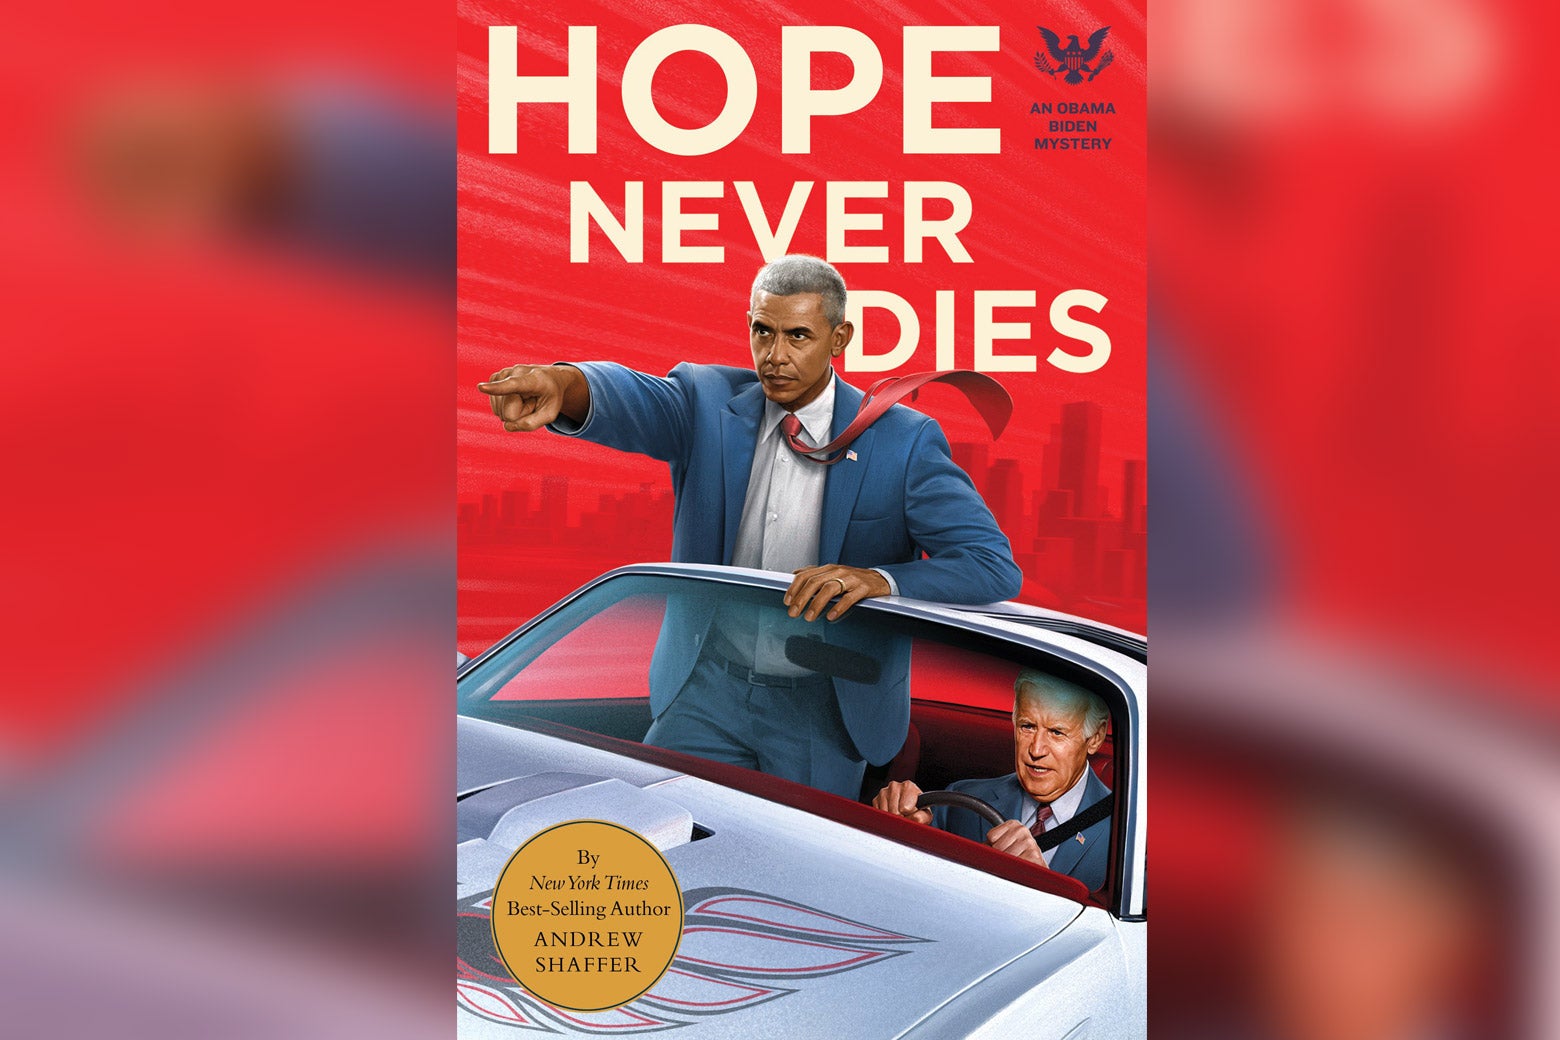 The cover of Hope Never Dies.